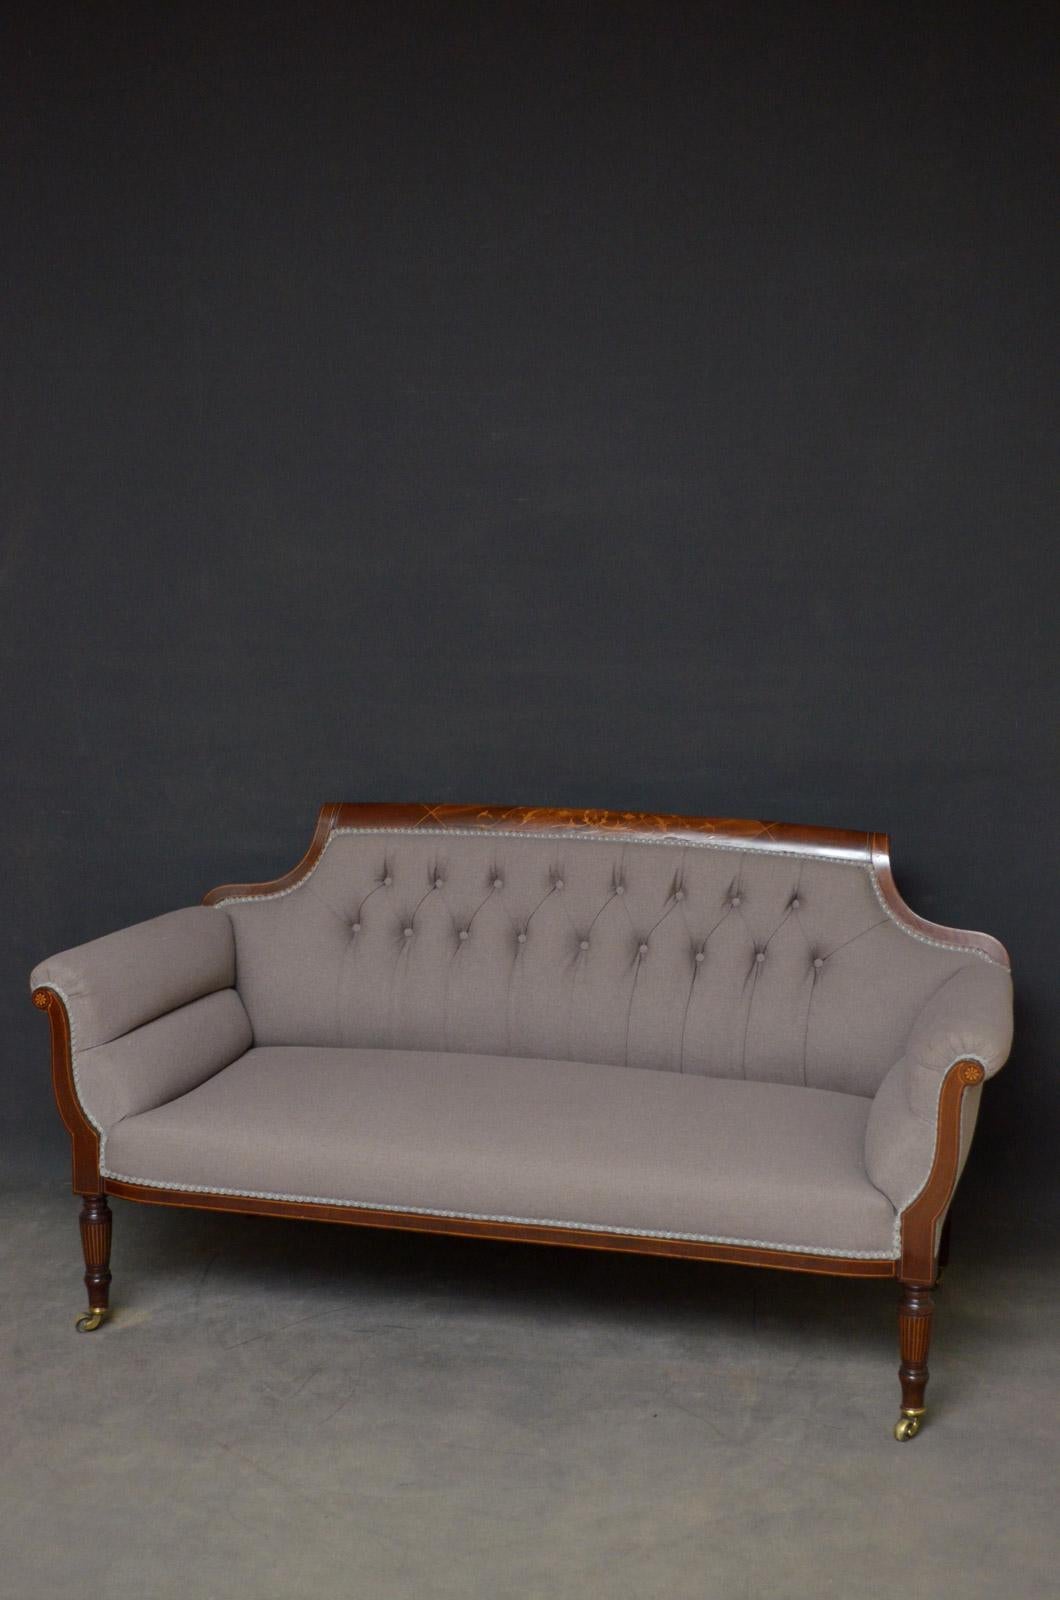 Sn4542 fine quality late Victorian mahogany settee, having flora inlaid top rail, buttoned back, generous seat and inlaid arms, standing on turned and string inlaid legs terminating in original brass castors. This antique sofa retains its original